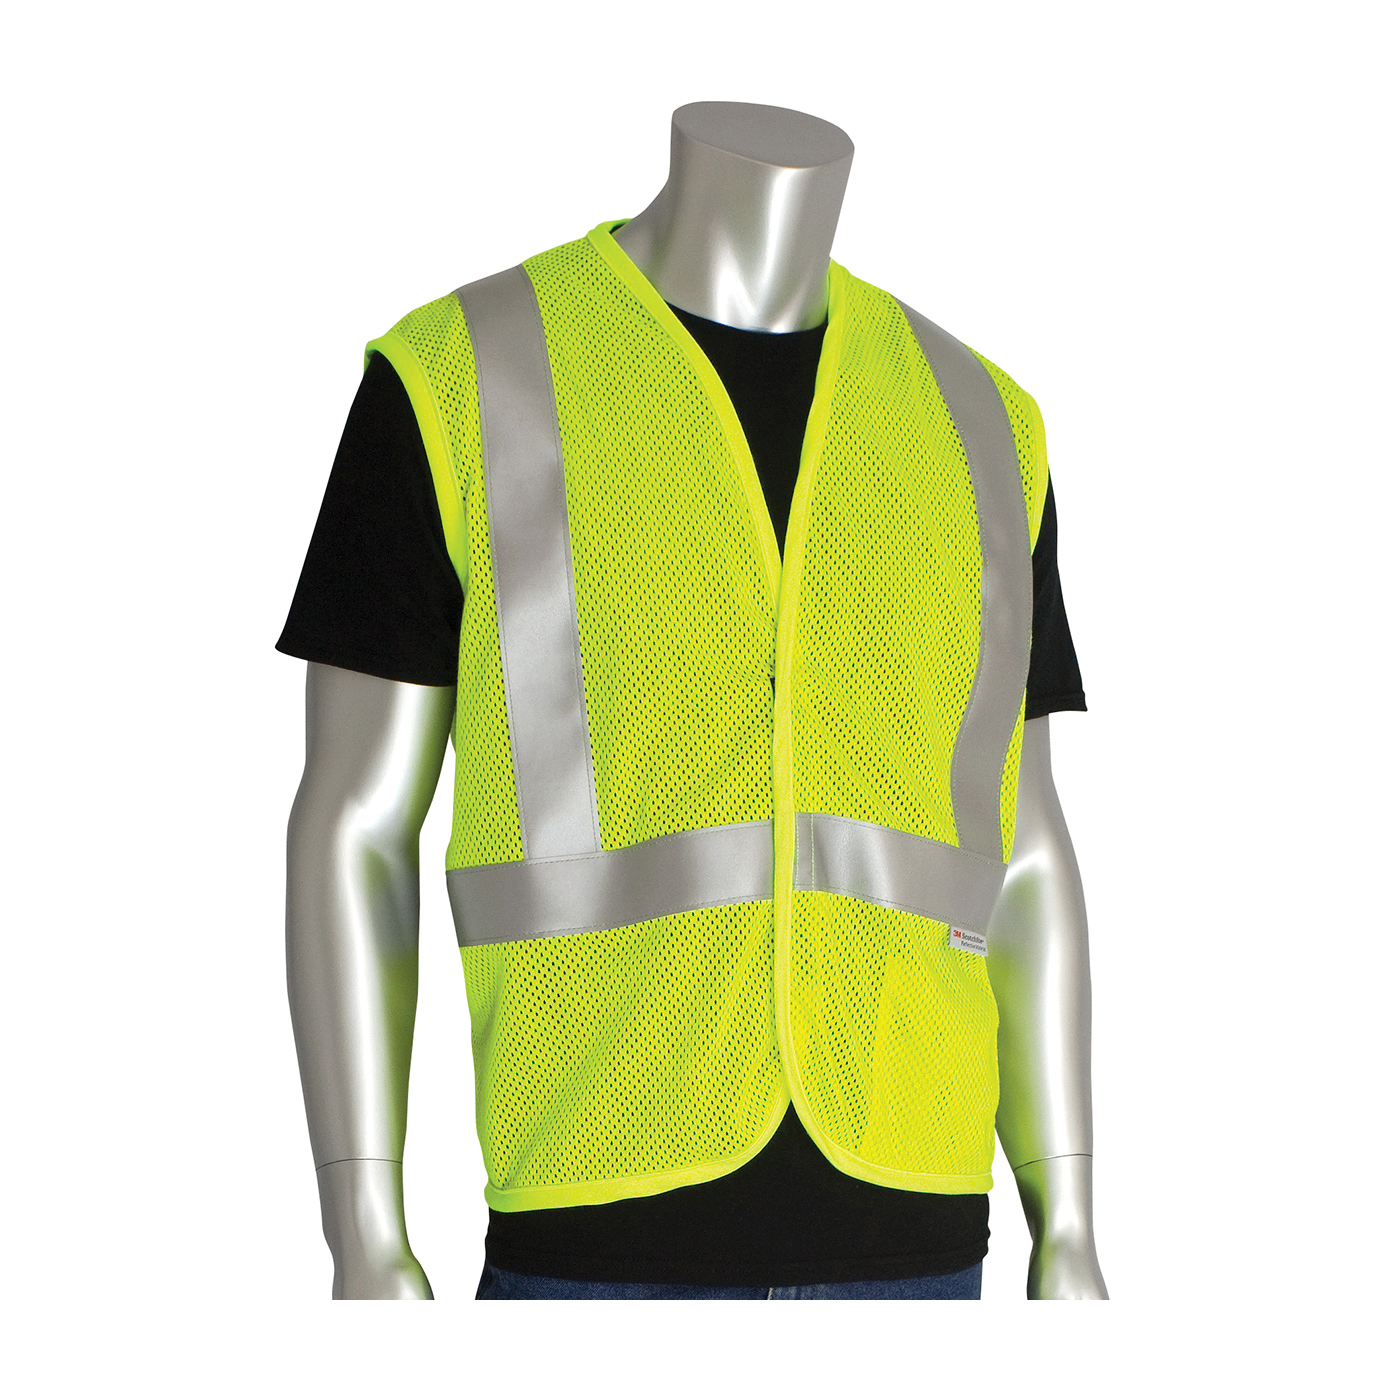 PIP® 305-2100-L Arc and Flame Resistant Vest, L, Hi-Viz Lime Yellow, Solid GlenGuard® Modacrylic/Aramid Blend Mesh Fabric, Hook and Loop Closure, 1 Pockets, ANSI Class: Class 2, Specifications Met: ANSI 107 Type R